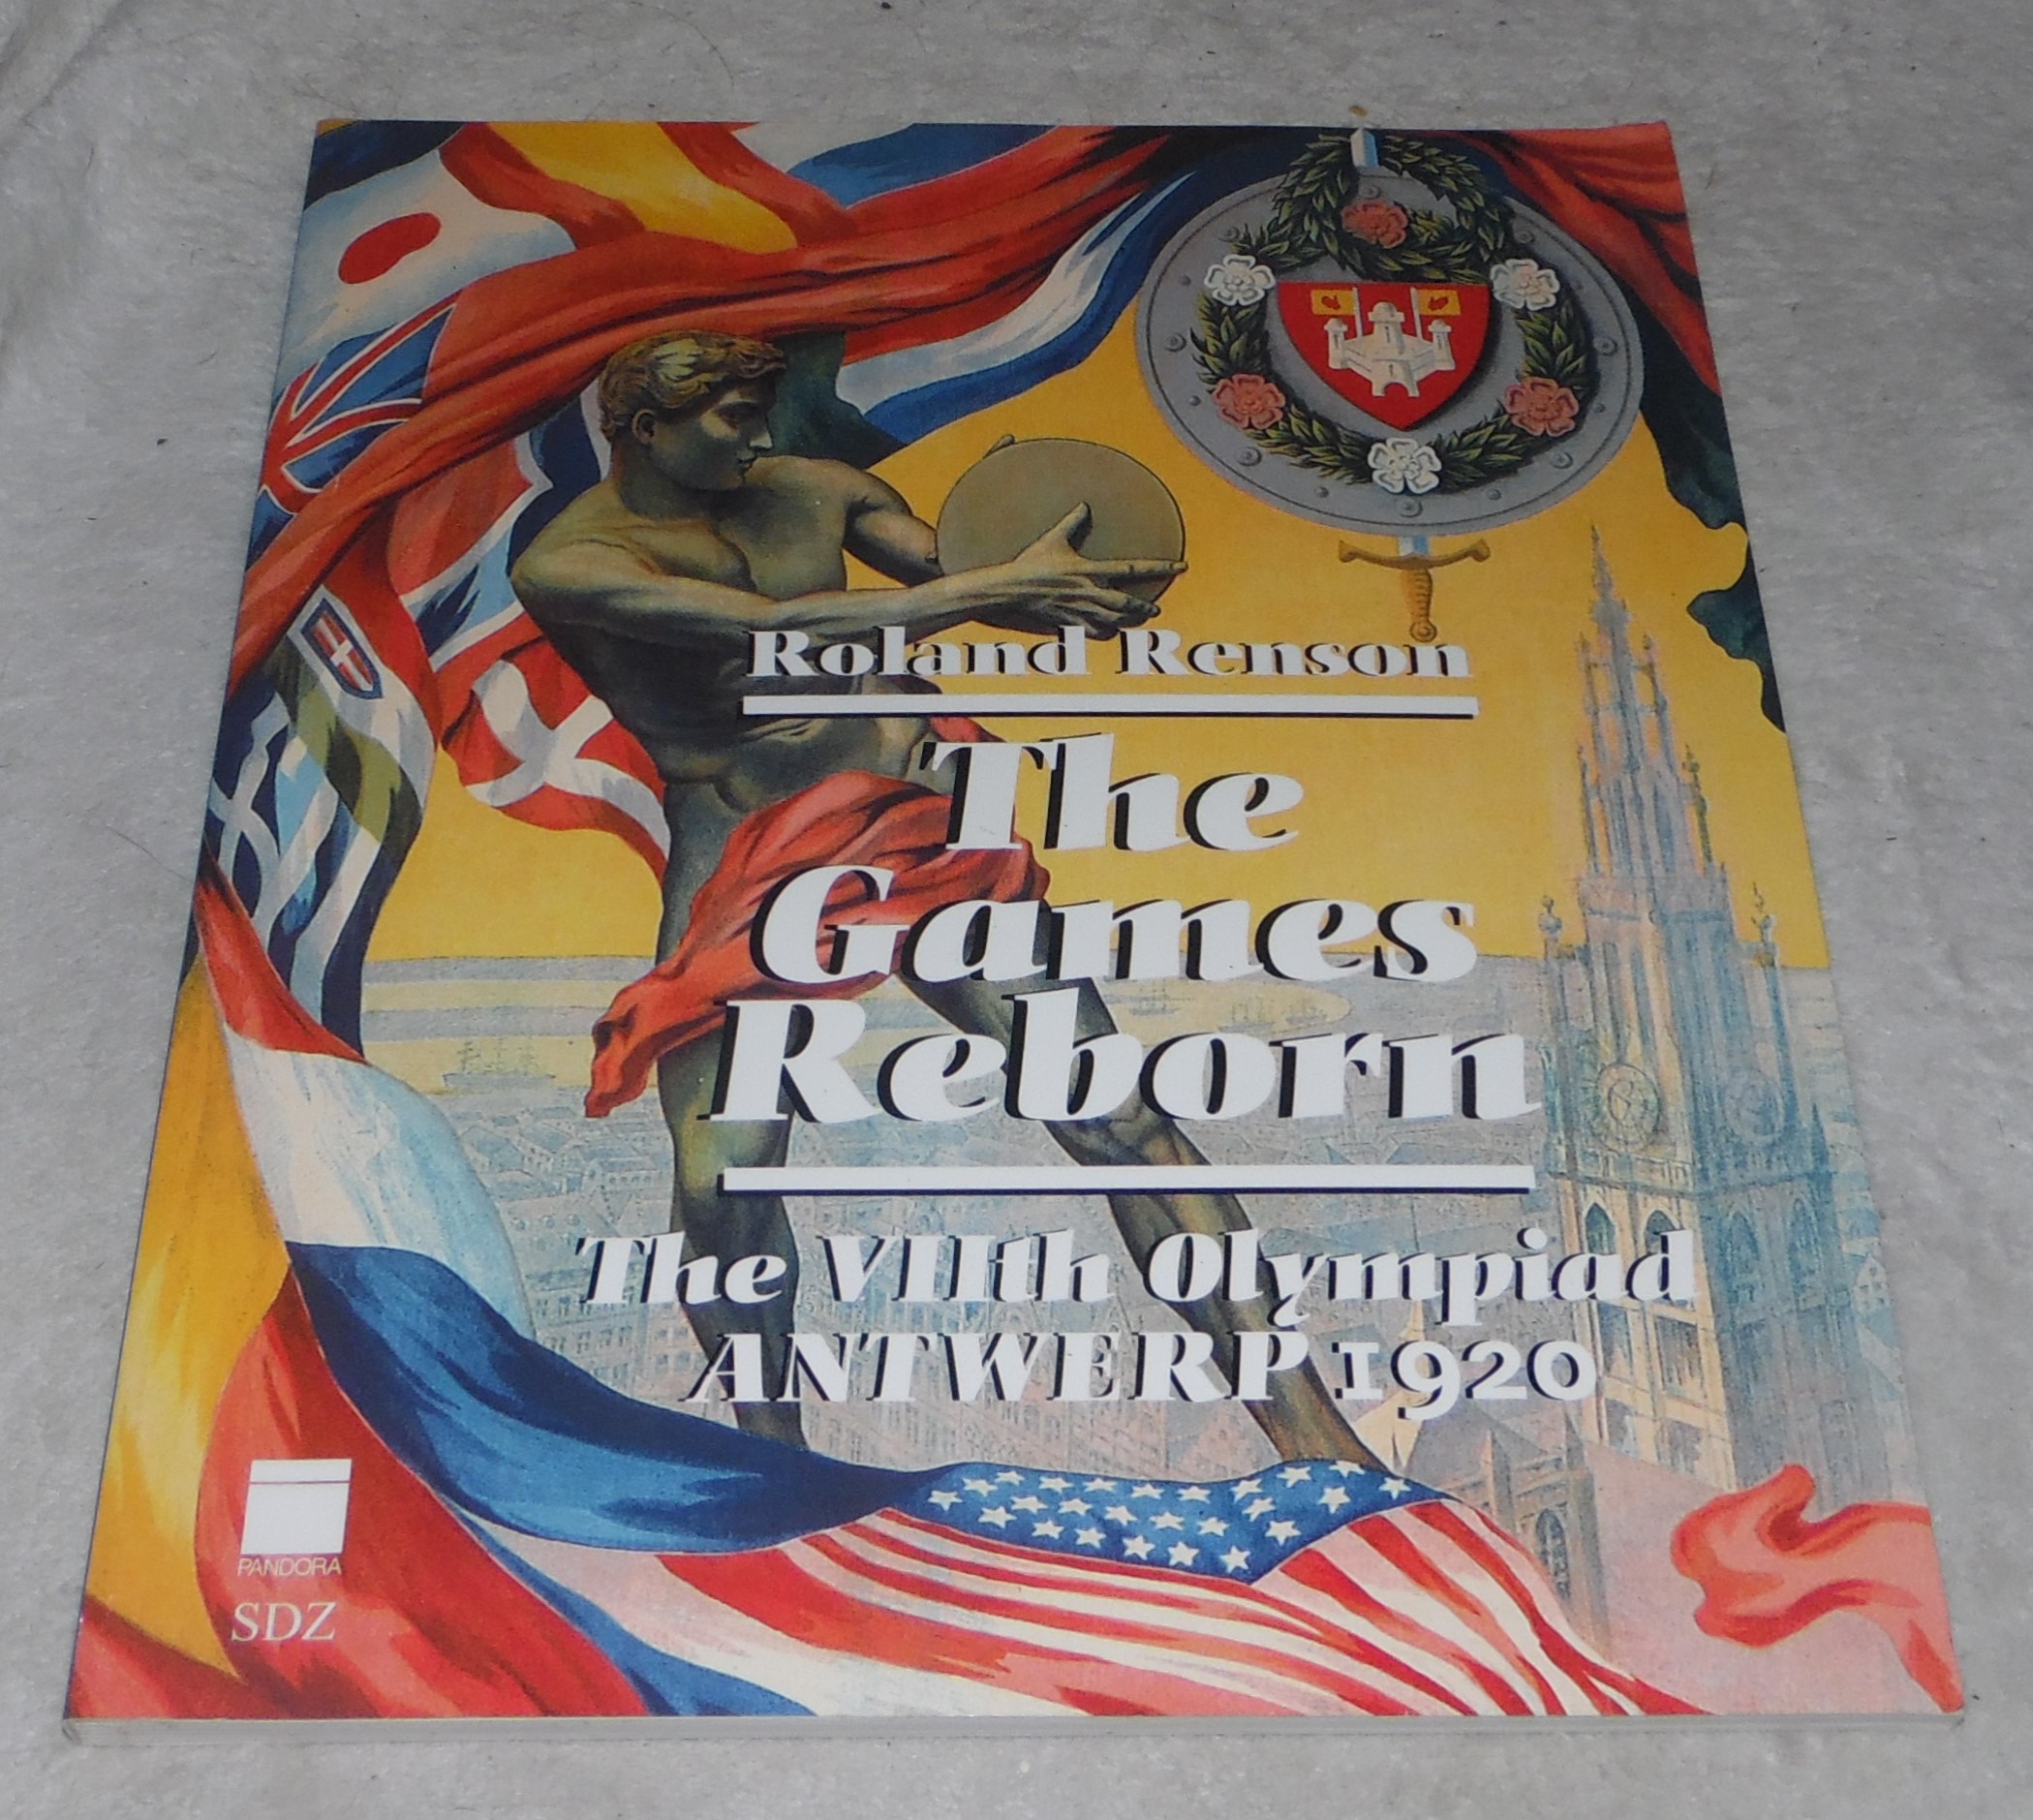 The Games Reborn. The VIIth Olympiad Antwerp 1920 - Roland Renson